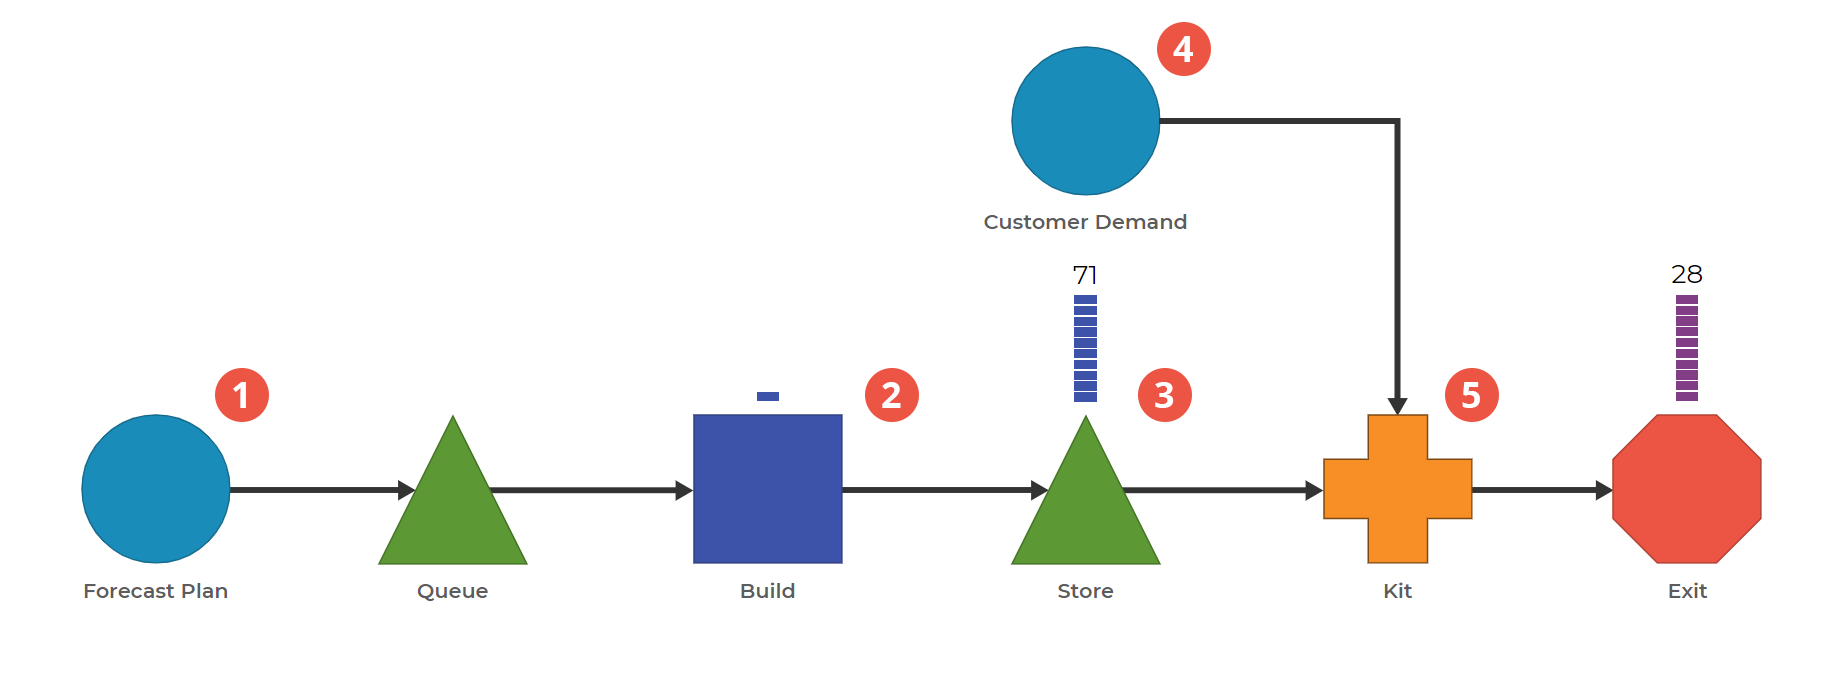 A Process Playground model showing Overproduction, where the process demand does not match the customer demand.